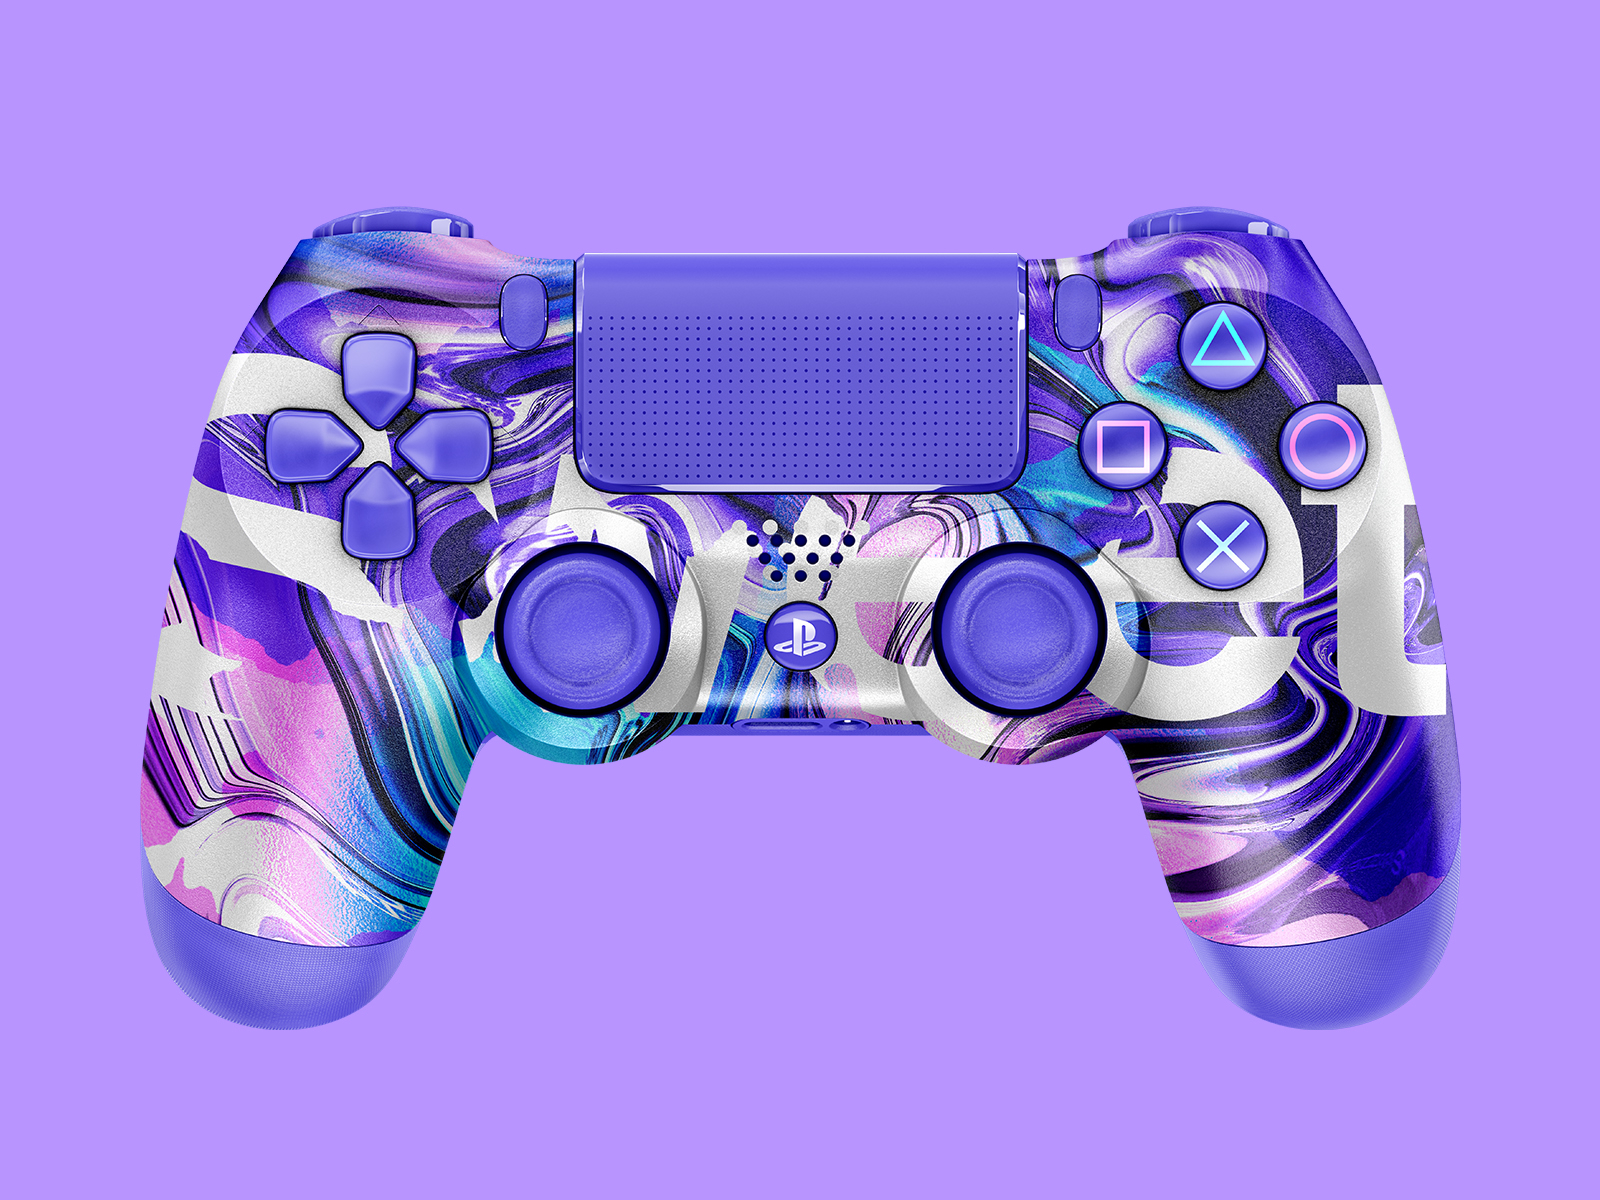 Playstation4 designs, themes, templates and downloadable graphic